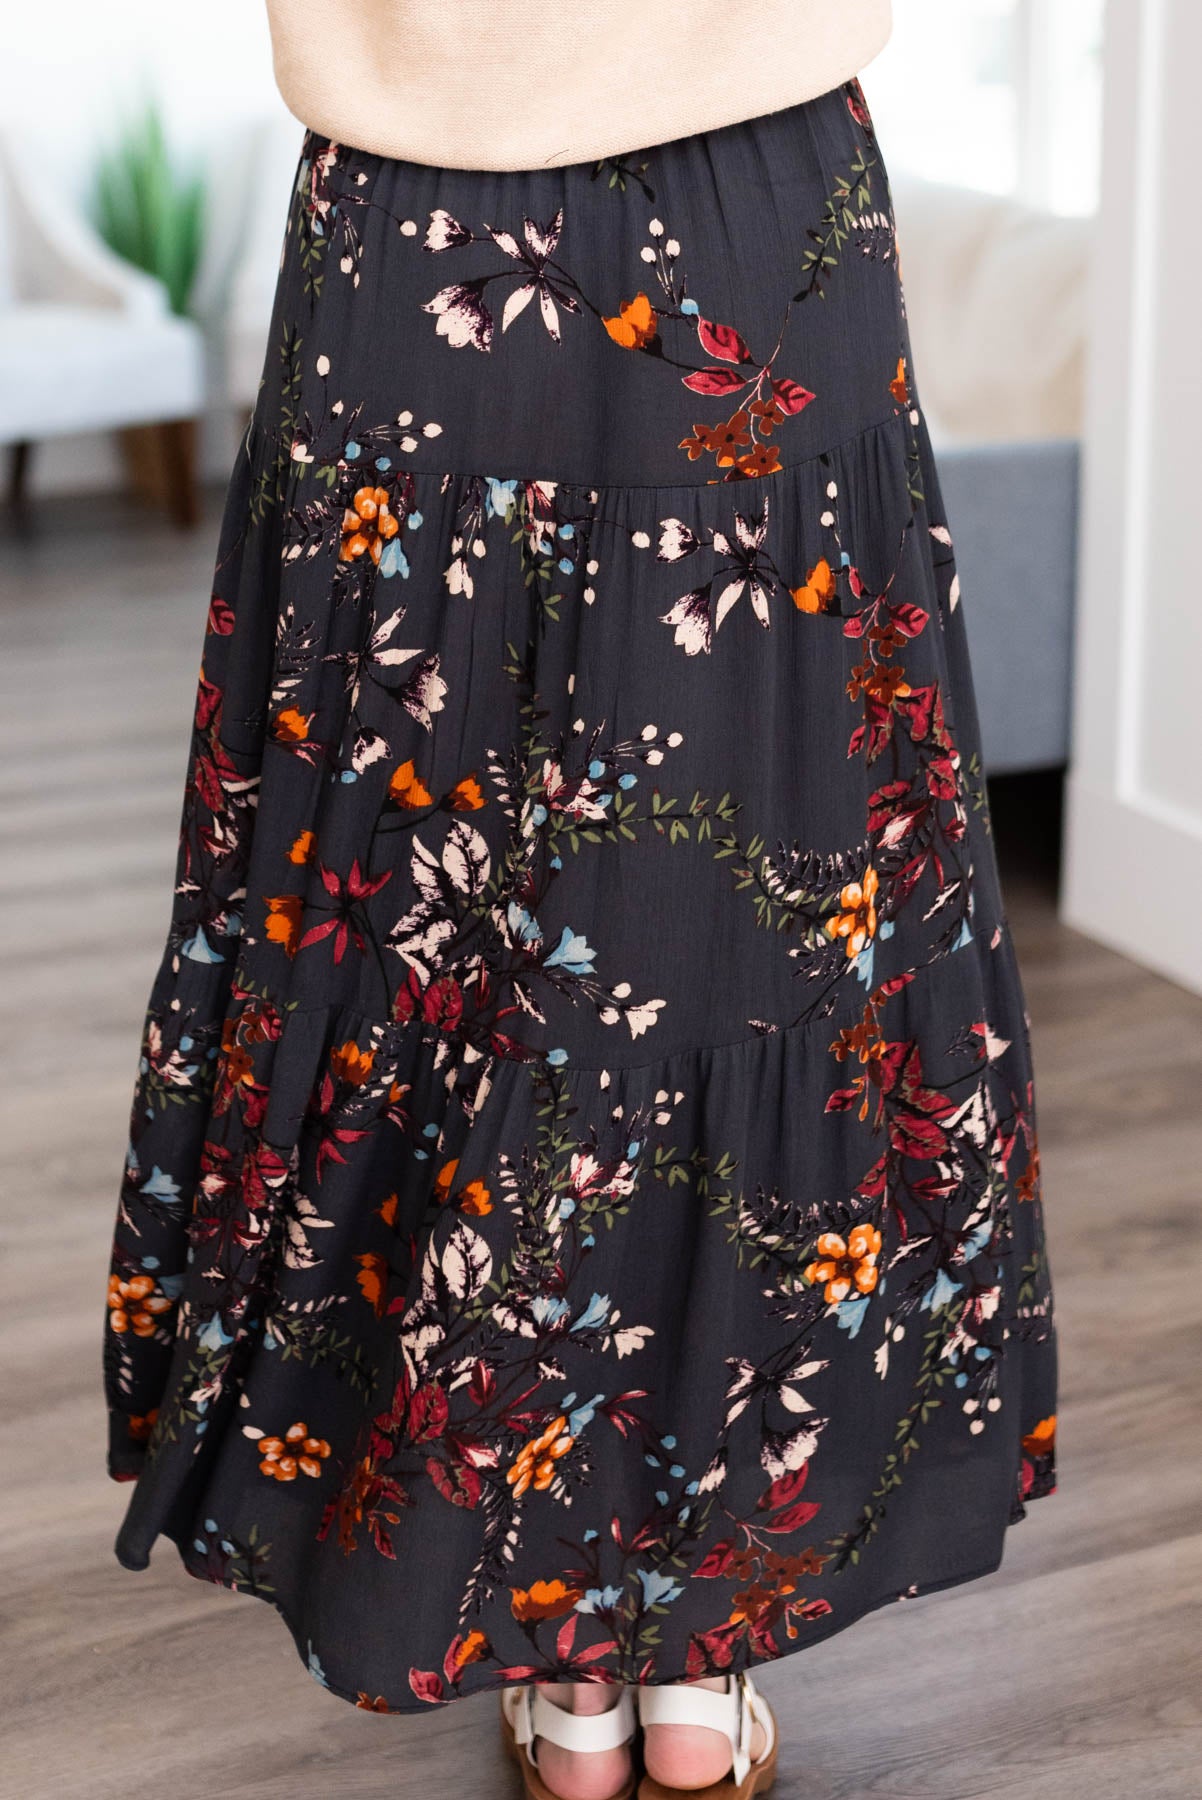 Back view of a dark teal floral skirt